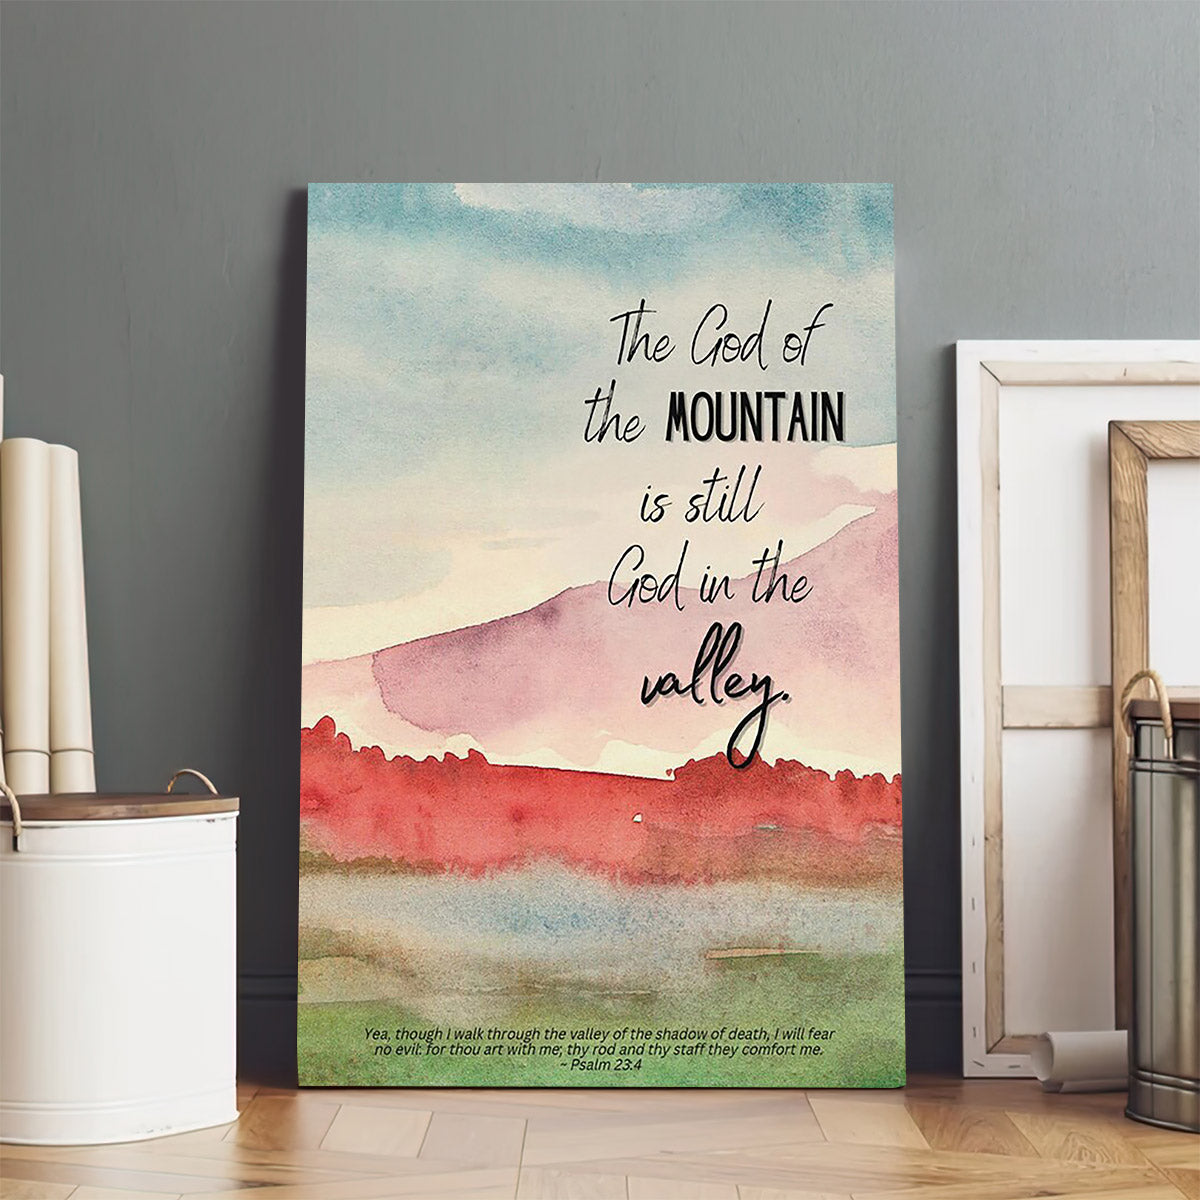 The God Of The Mountain Is Still God In The Valley Christian - Jesus Christ Canvas - Christian Wall Art - Religious Canvas Art